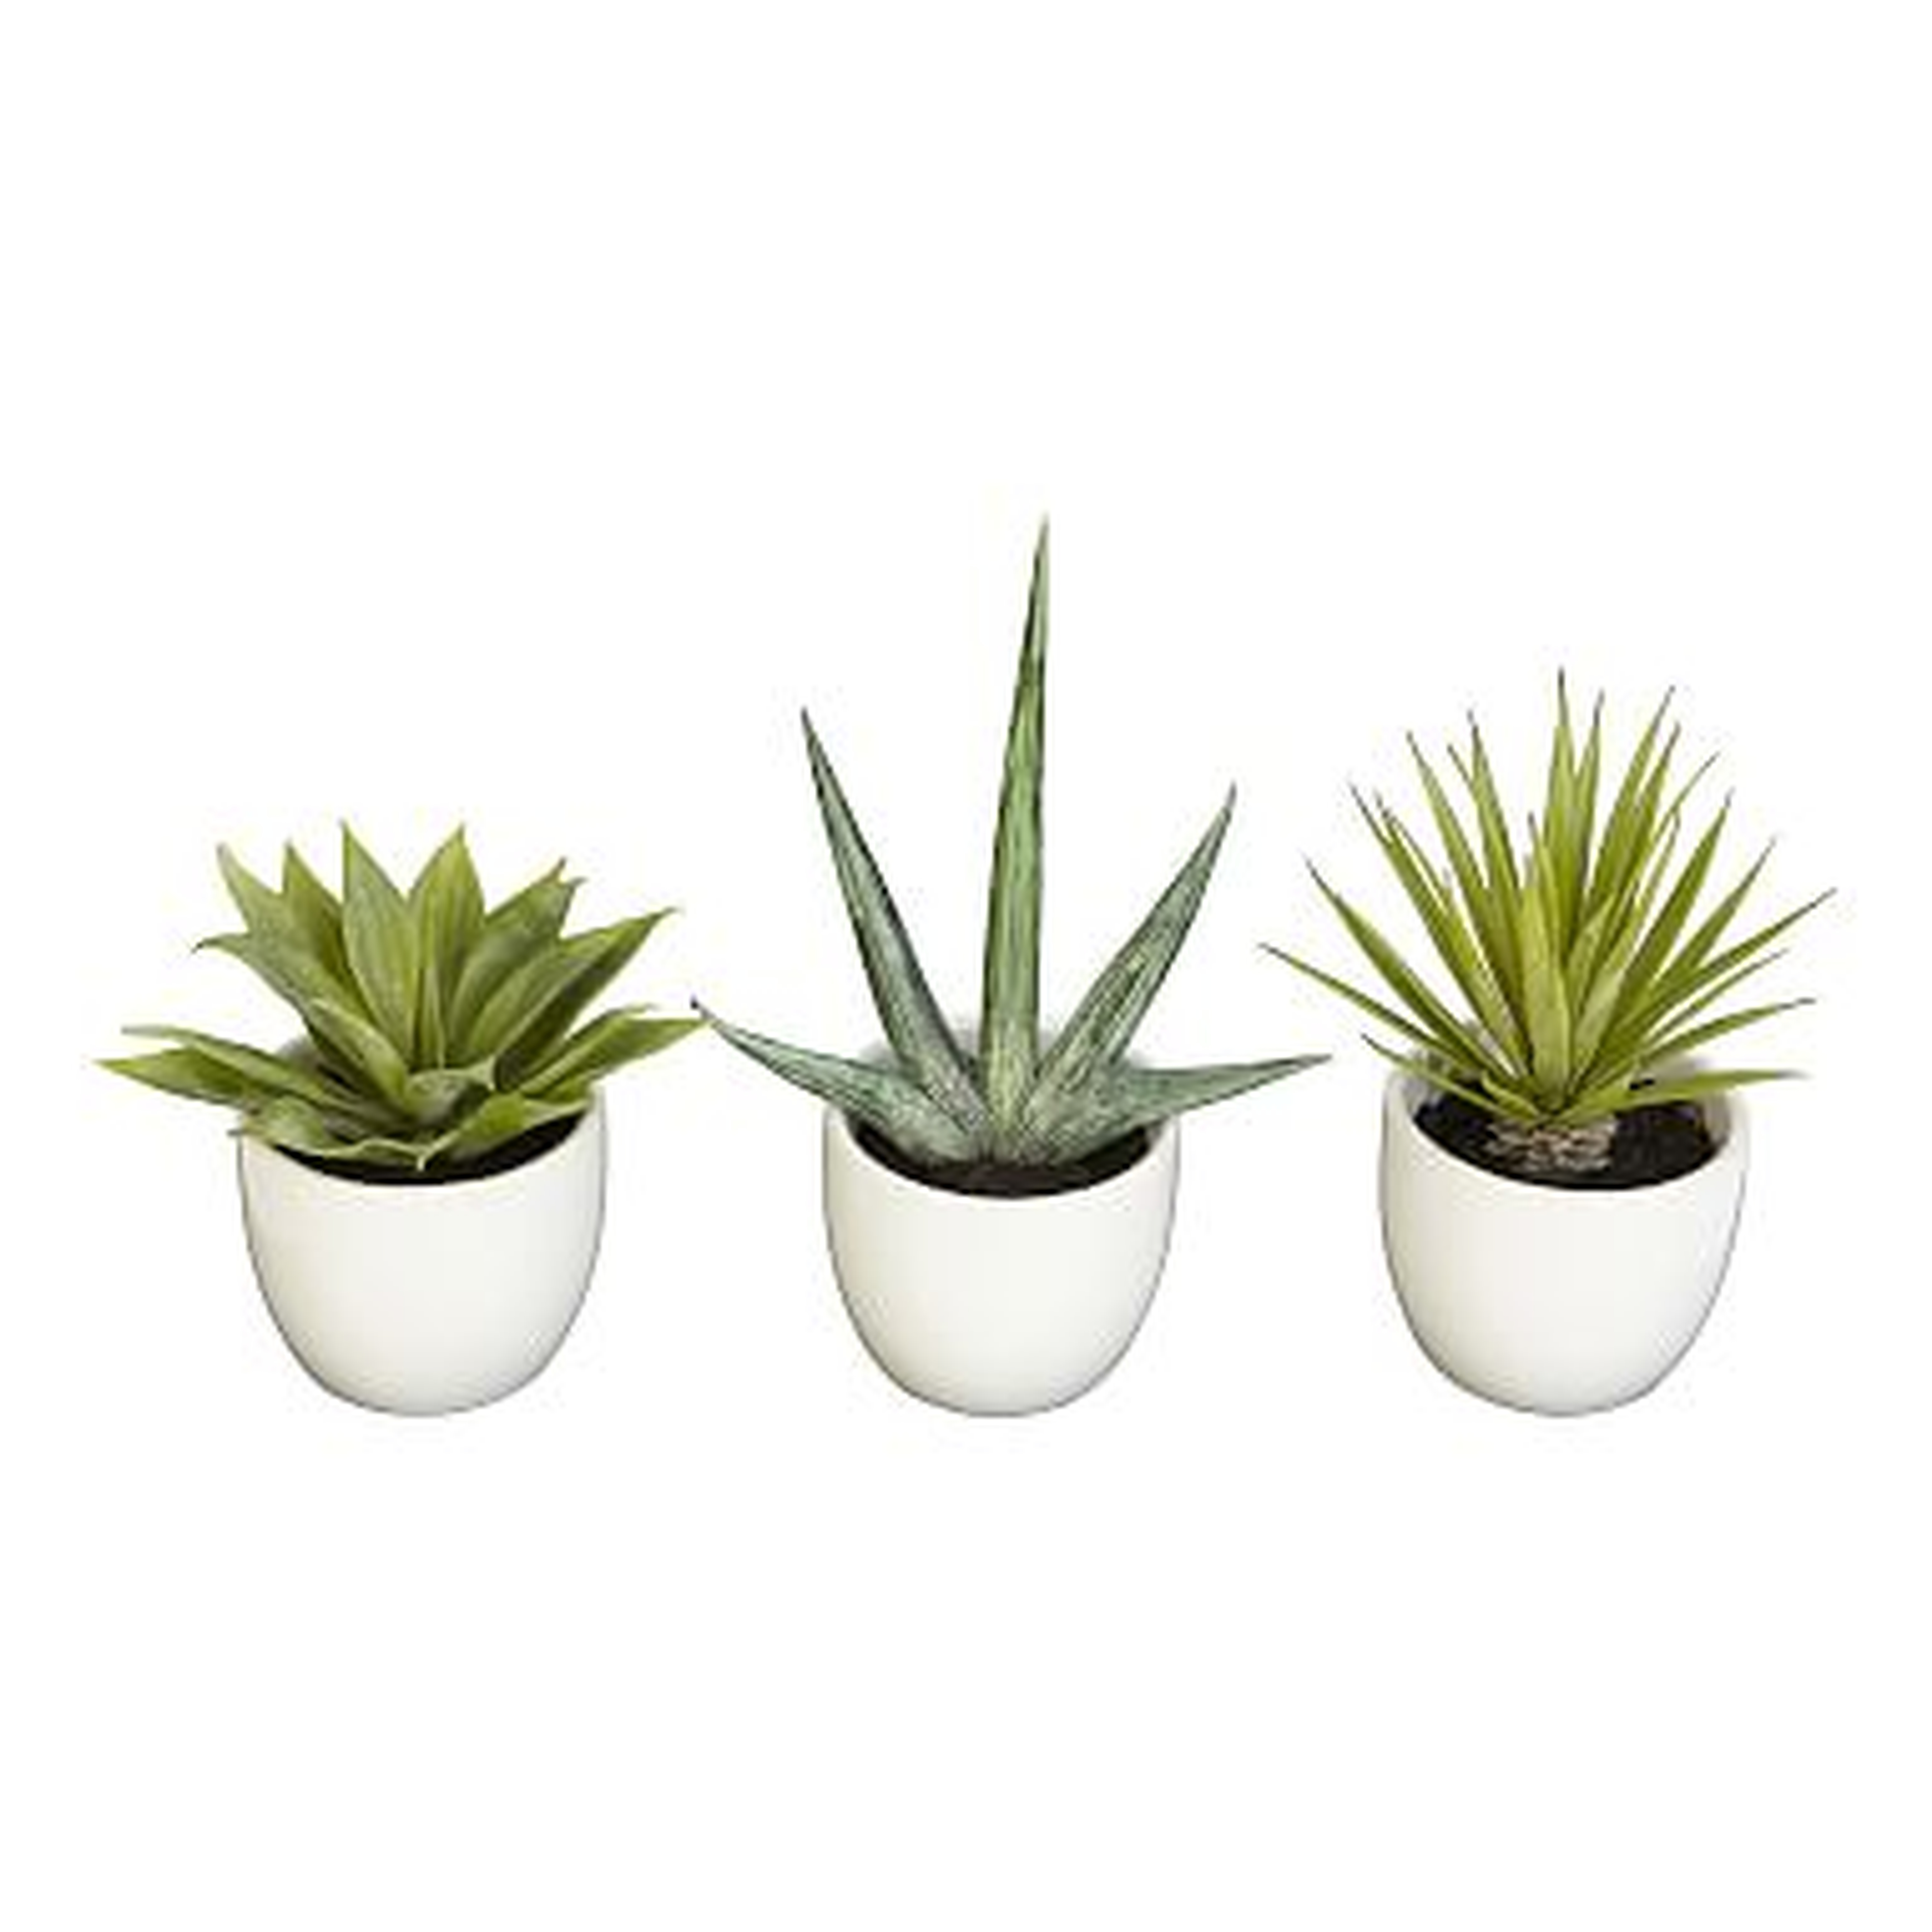 Faux Potted Southwest Plants, Set of 3 - Pottery Barn Teen